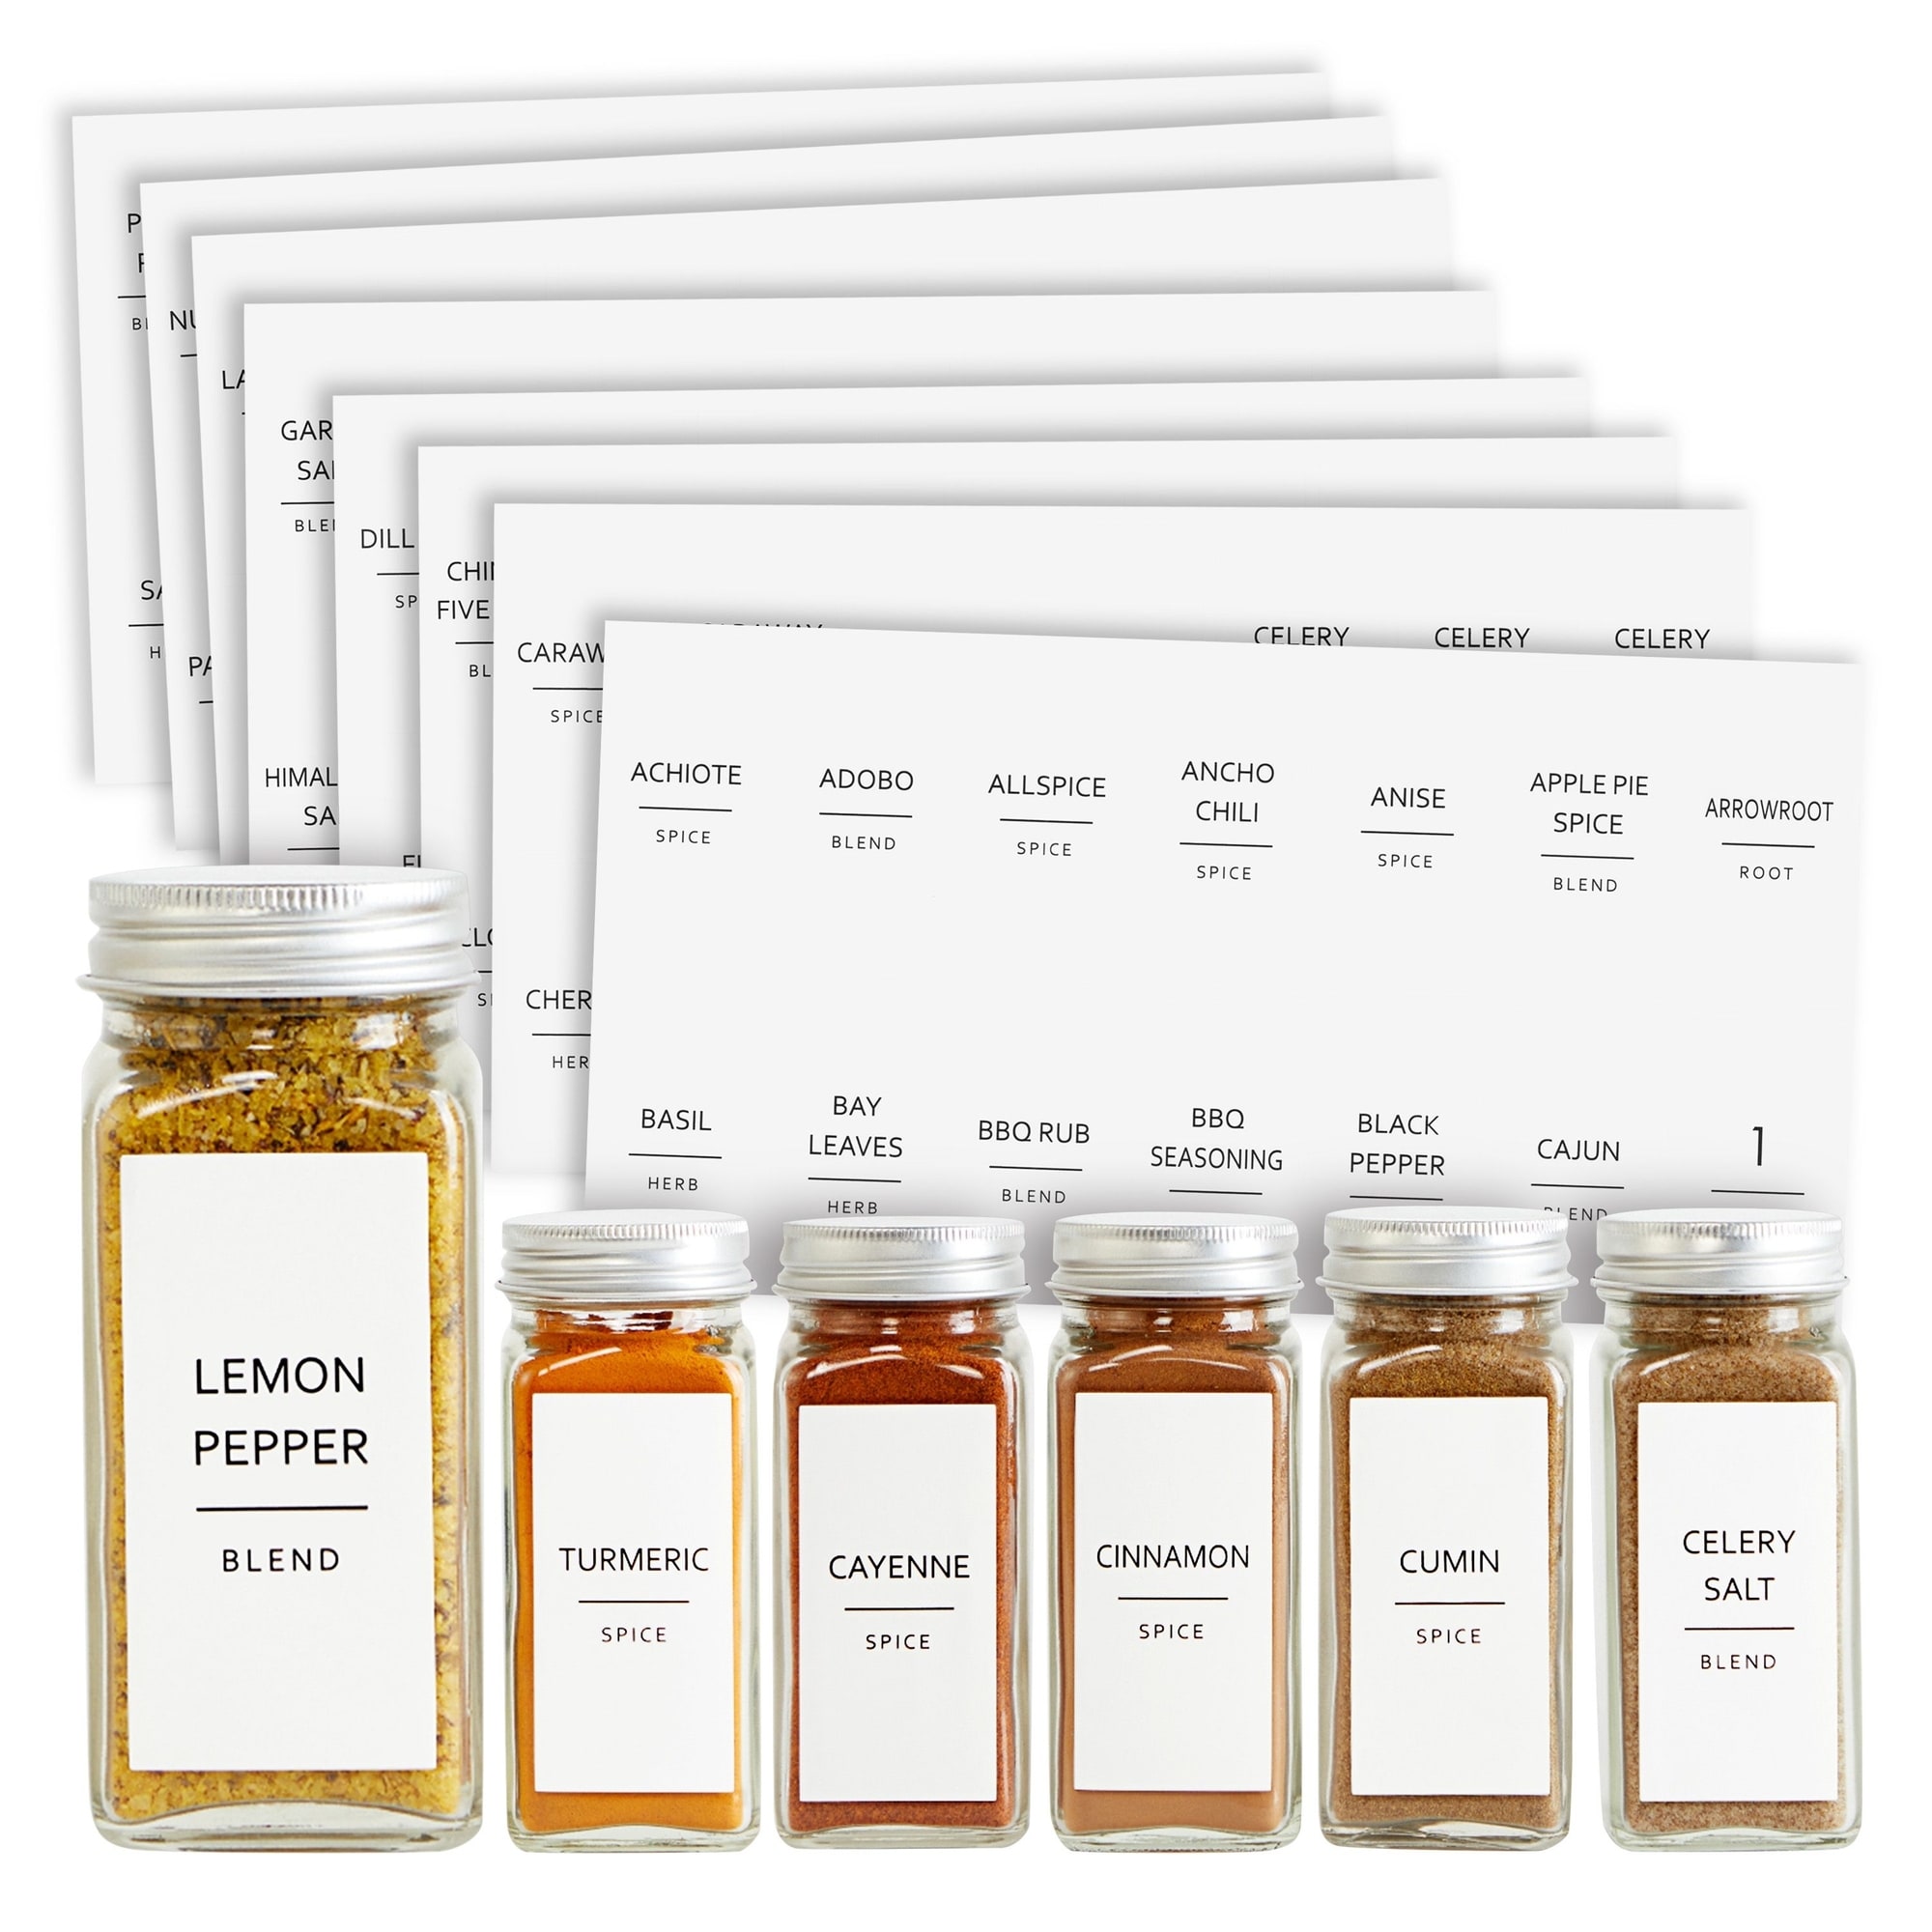 https://ak1.ostkcdn.com/images/products/is/images/direct/779700e48be74224db5ac42943ac3b09d3f4e5f7/140-Spice-Labels-Stickers%2C-Preprinted-White-Minimalist-Spice-Jar-Labels.jpg